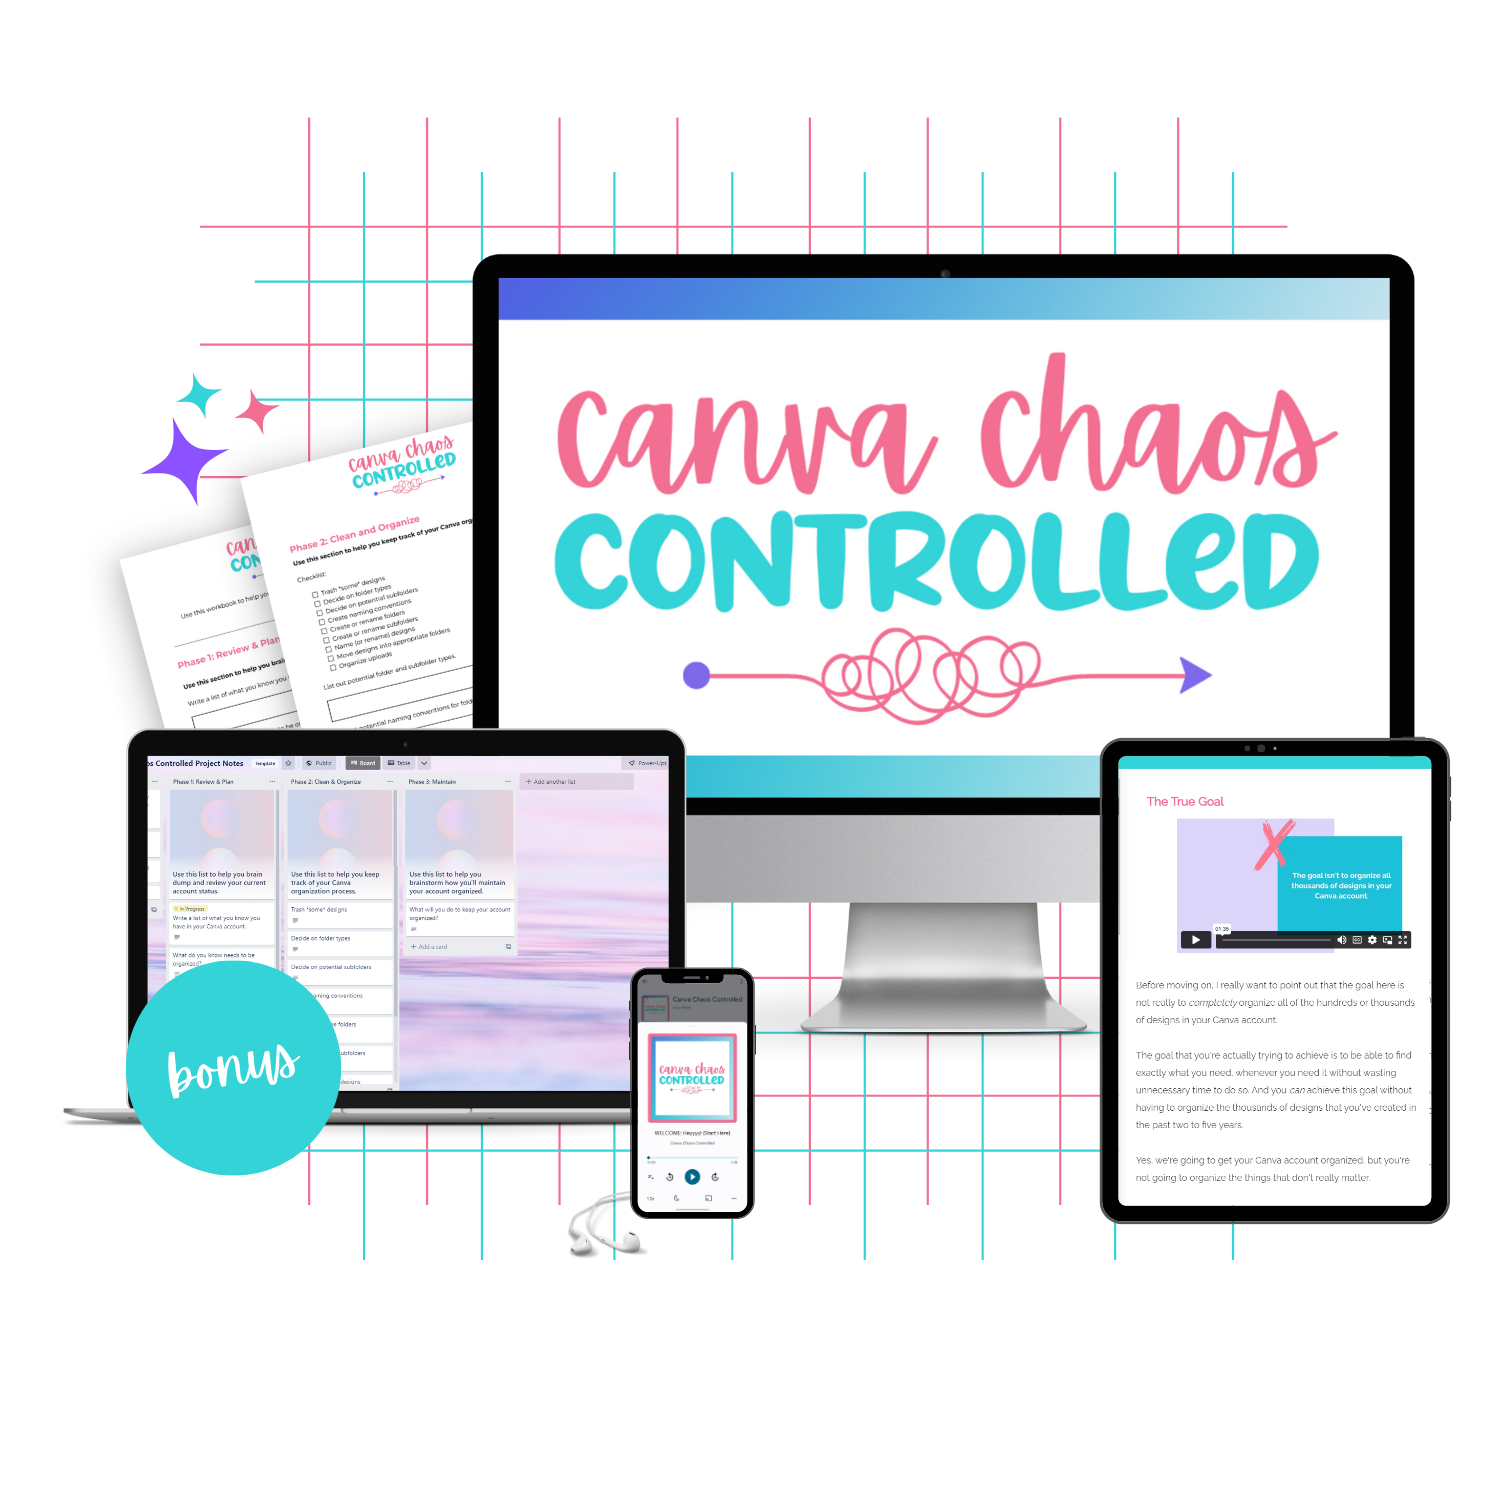 A tech mockup displaying the Canva Chaos Controlled course that’ll teach about Canva organization.